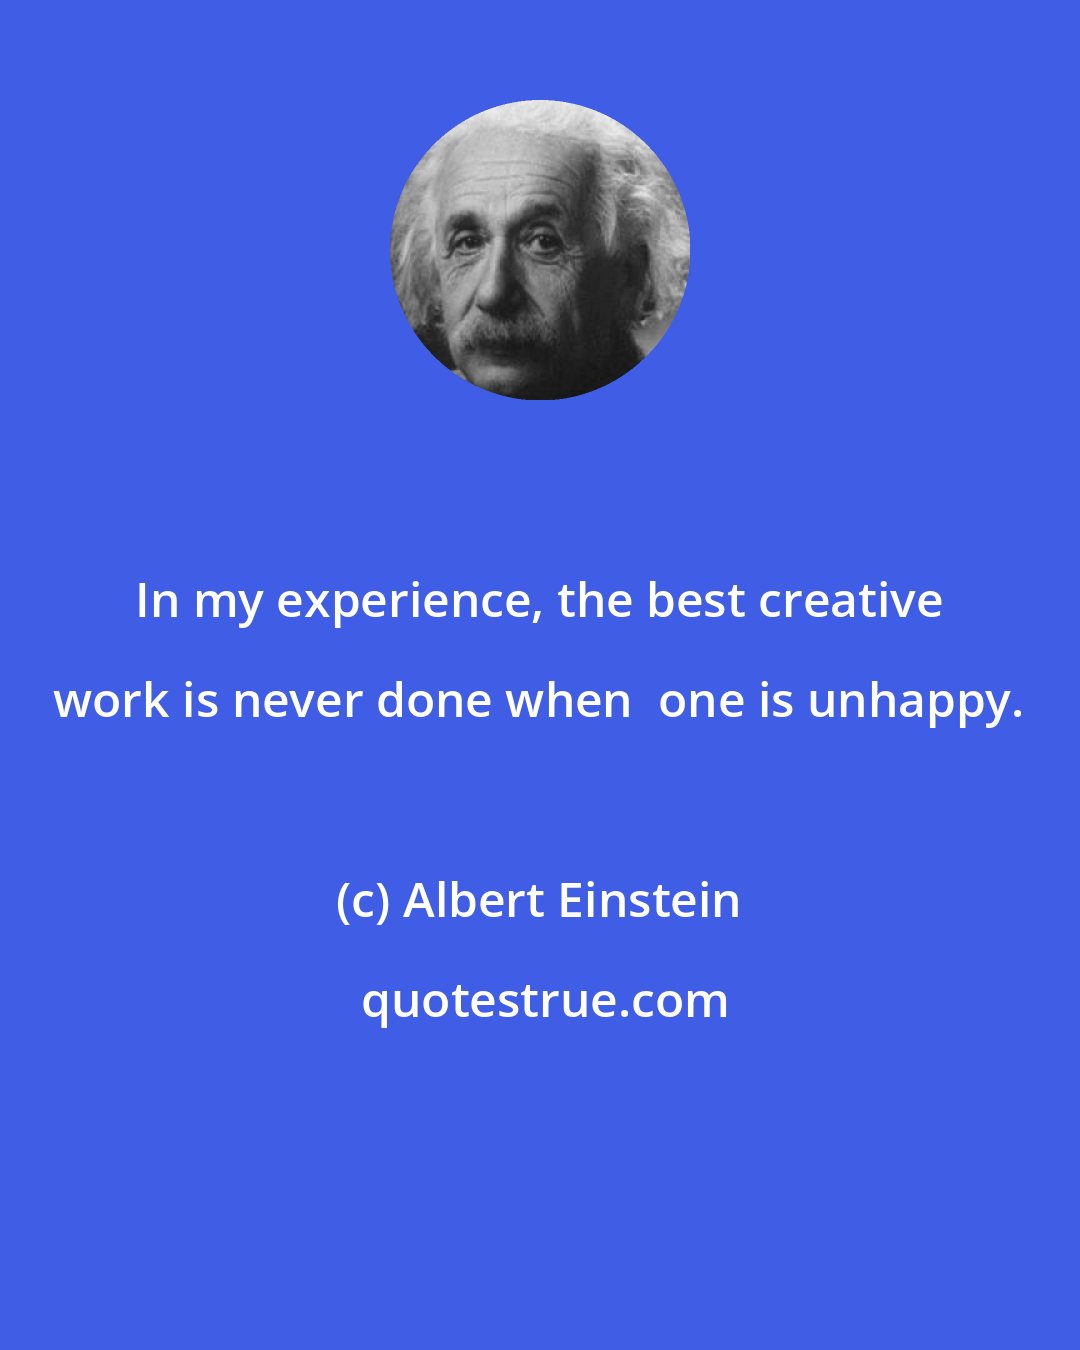 Albert Einstein: In my experience, the best creative work is never done when  one is unhappy.